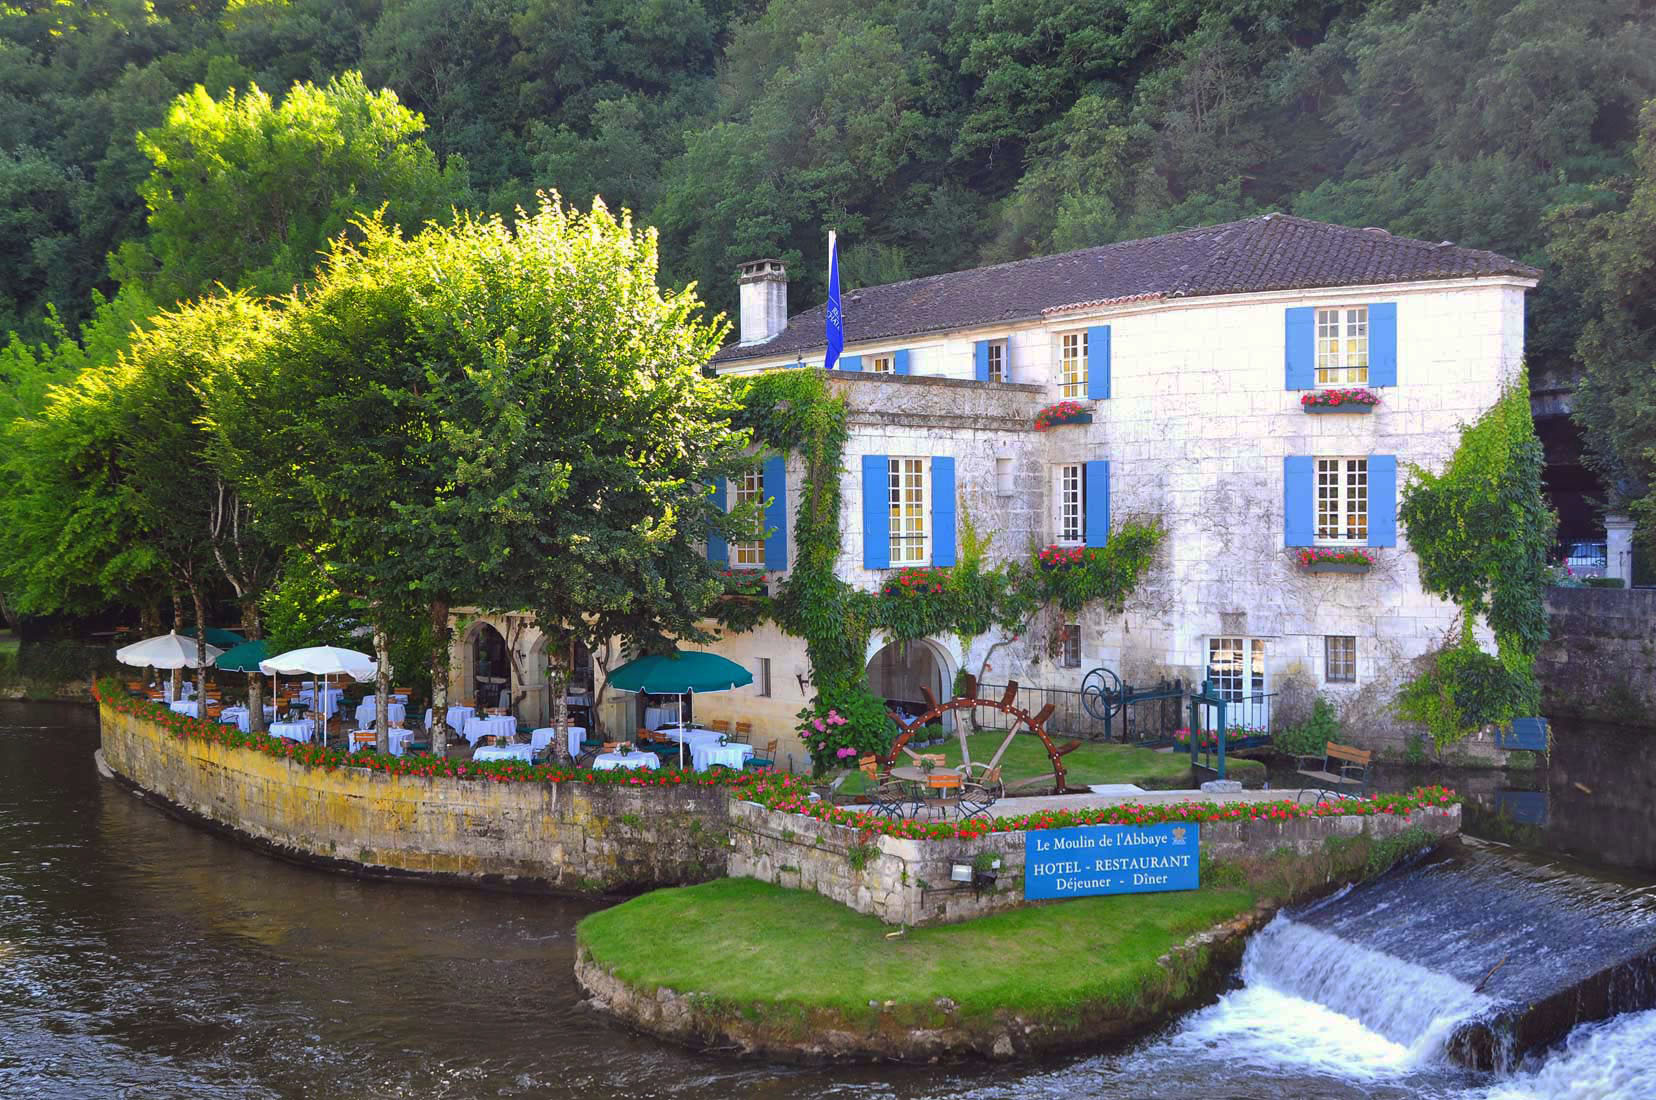 Charming French Village Terrace Restaurant by the River